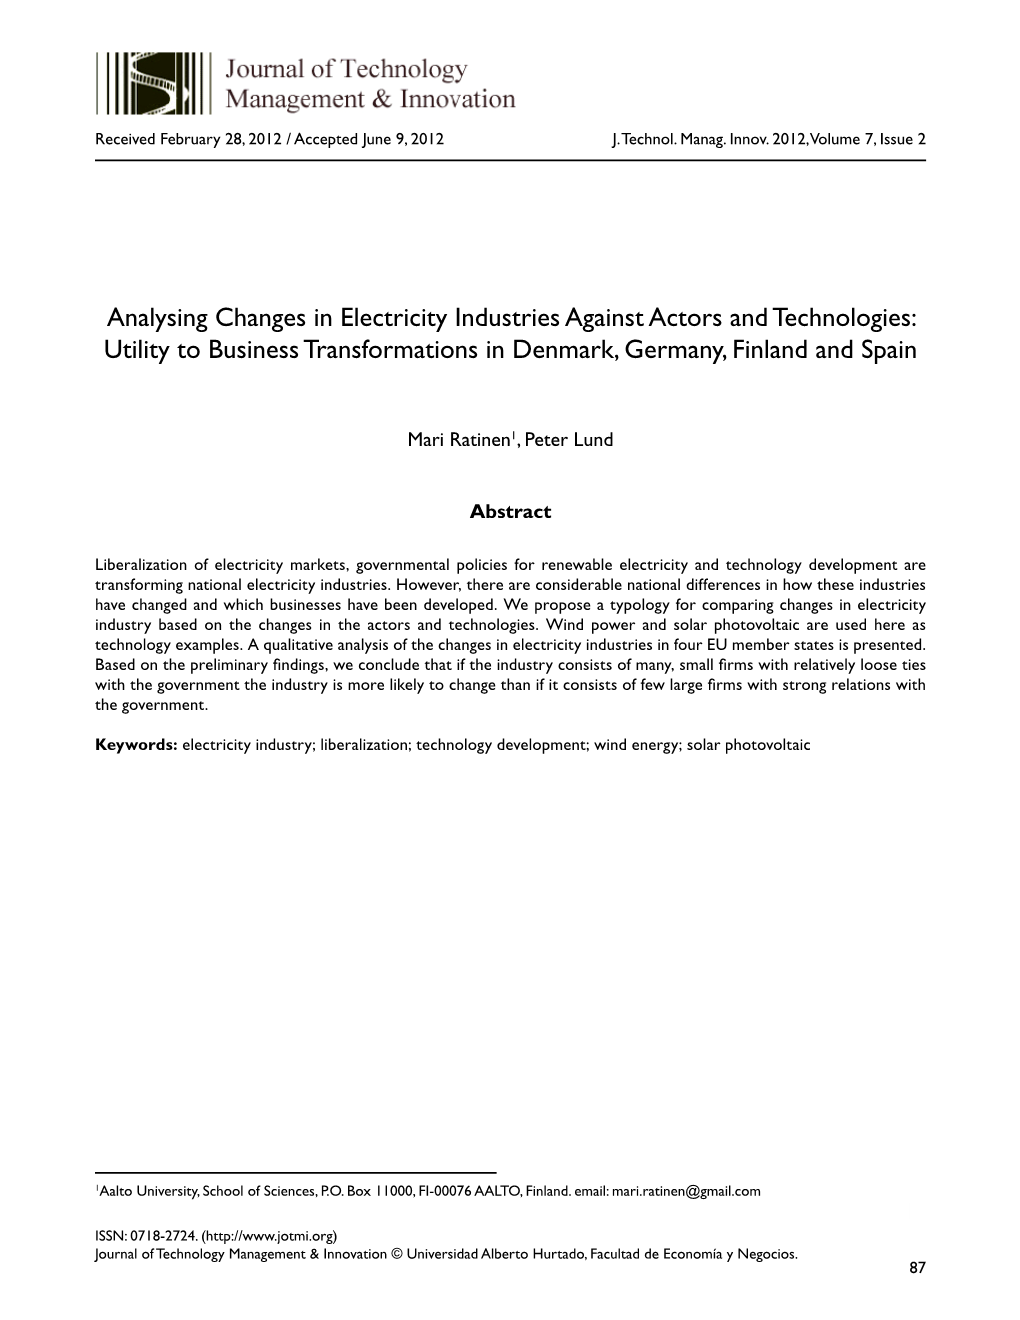 Analysing Changes in Electricity Industries Against Actors and Technologies: Utility to Business Transformations in Denmark, Germany, Finland and Spain